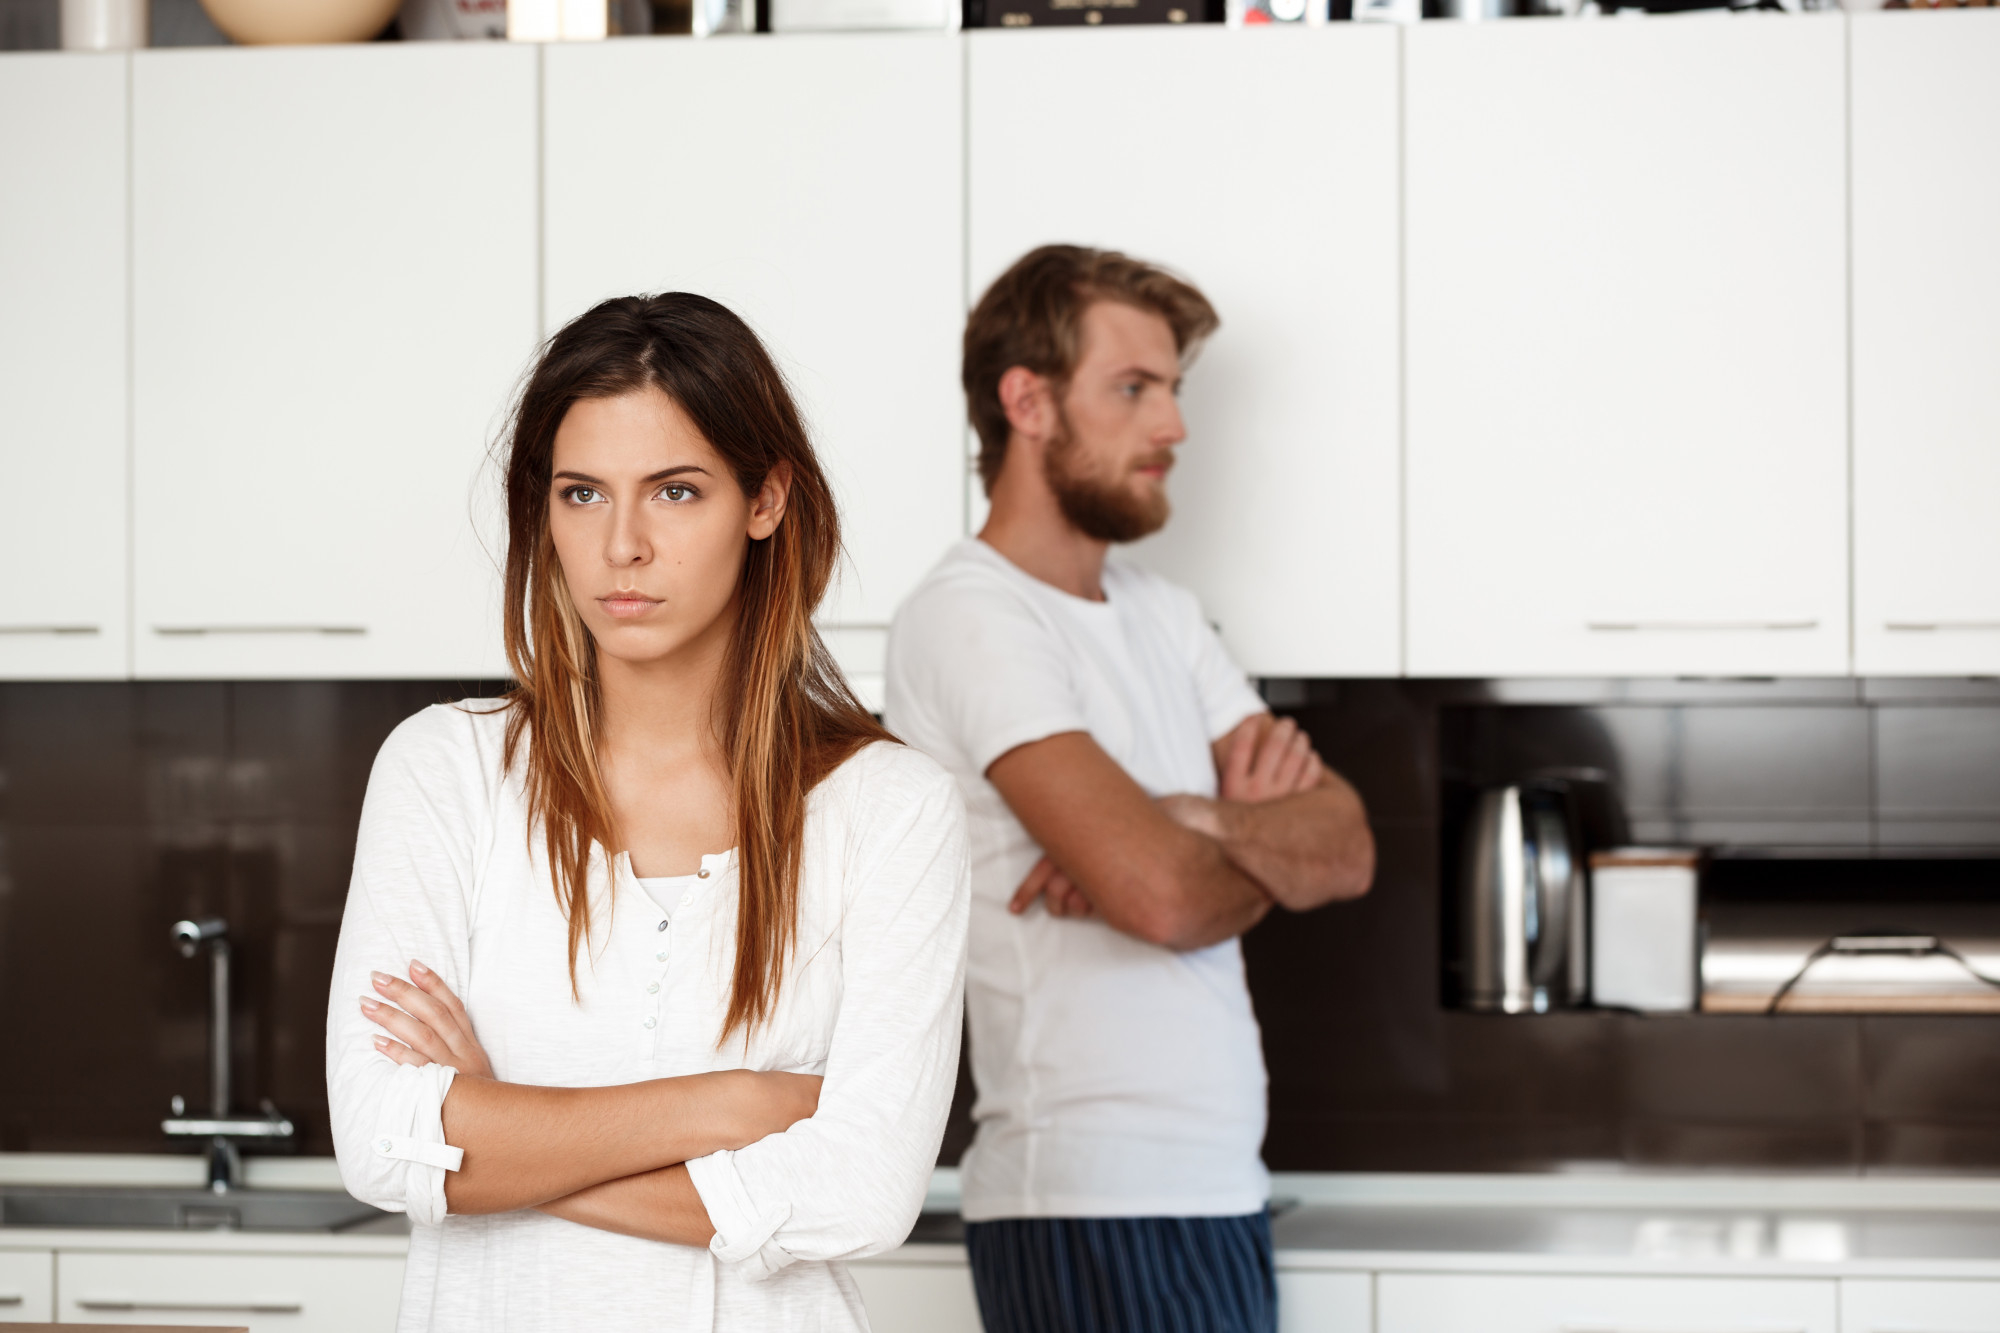 A displeased couple standing in a kitchen | Source: freepik.com